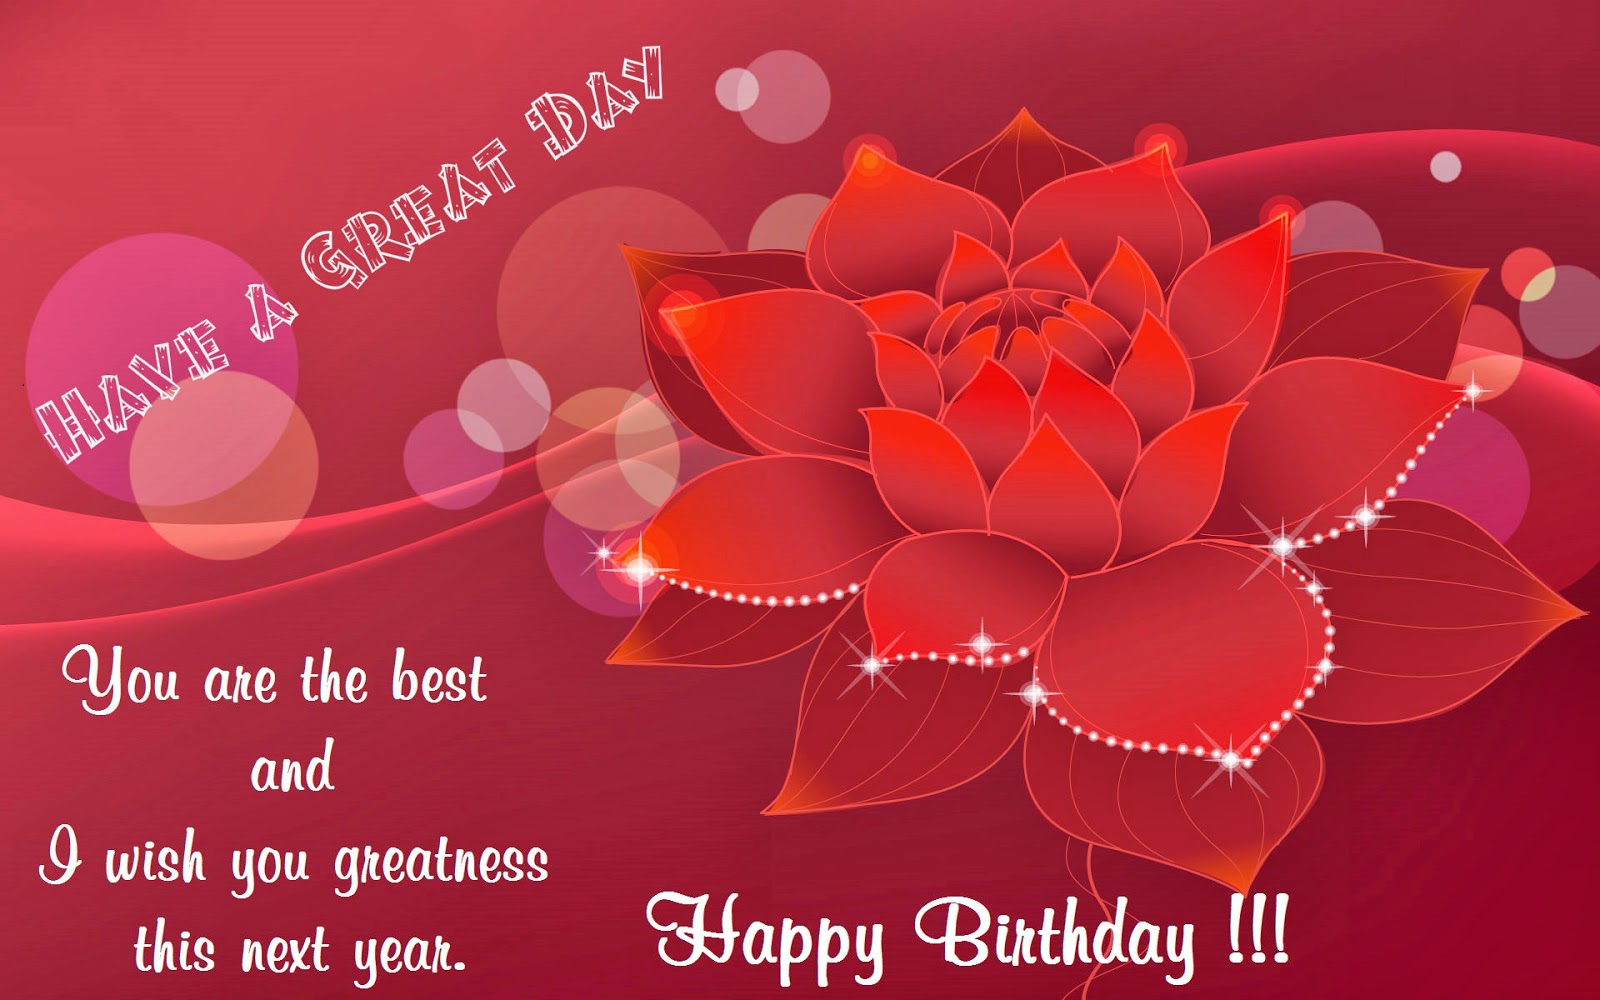 Happy+Birthday+Wishes+Wallpapers+-+150.jpg